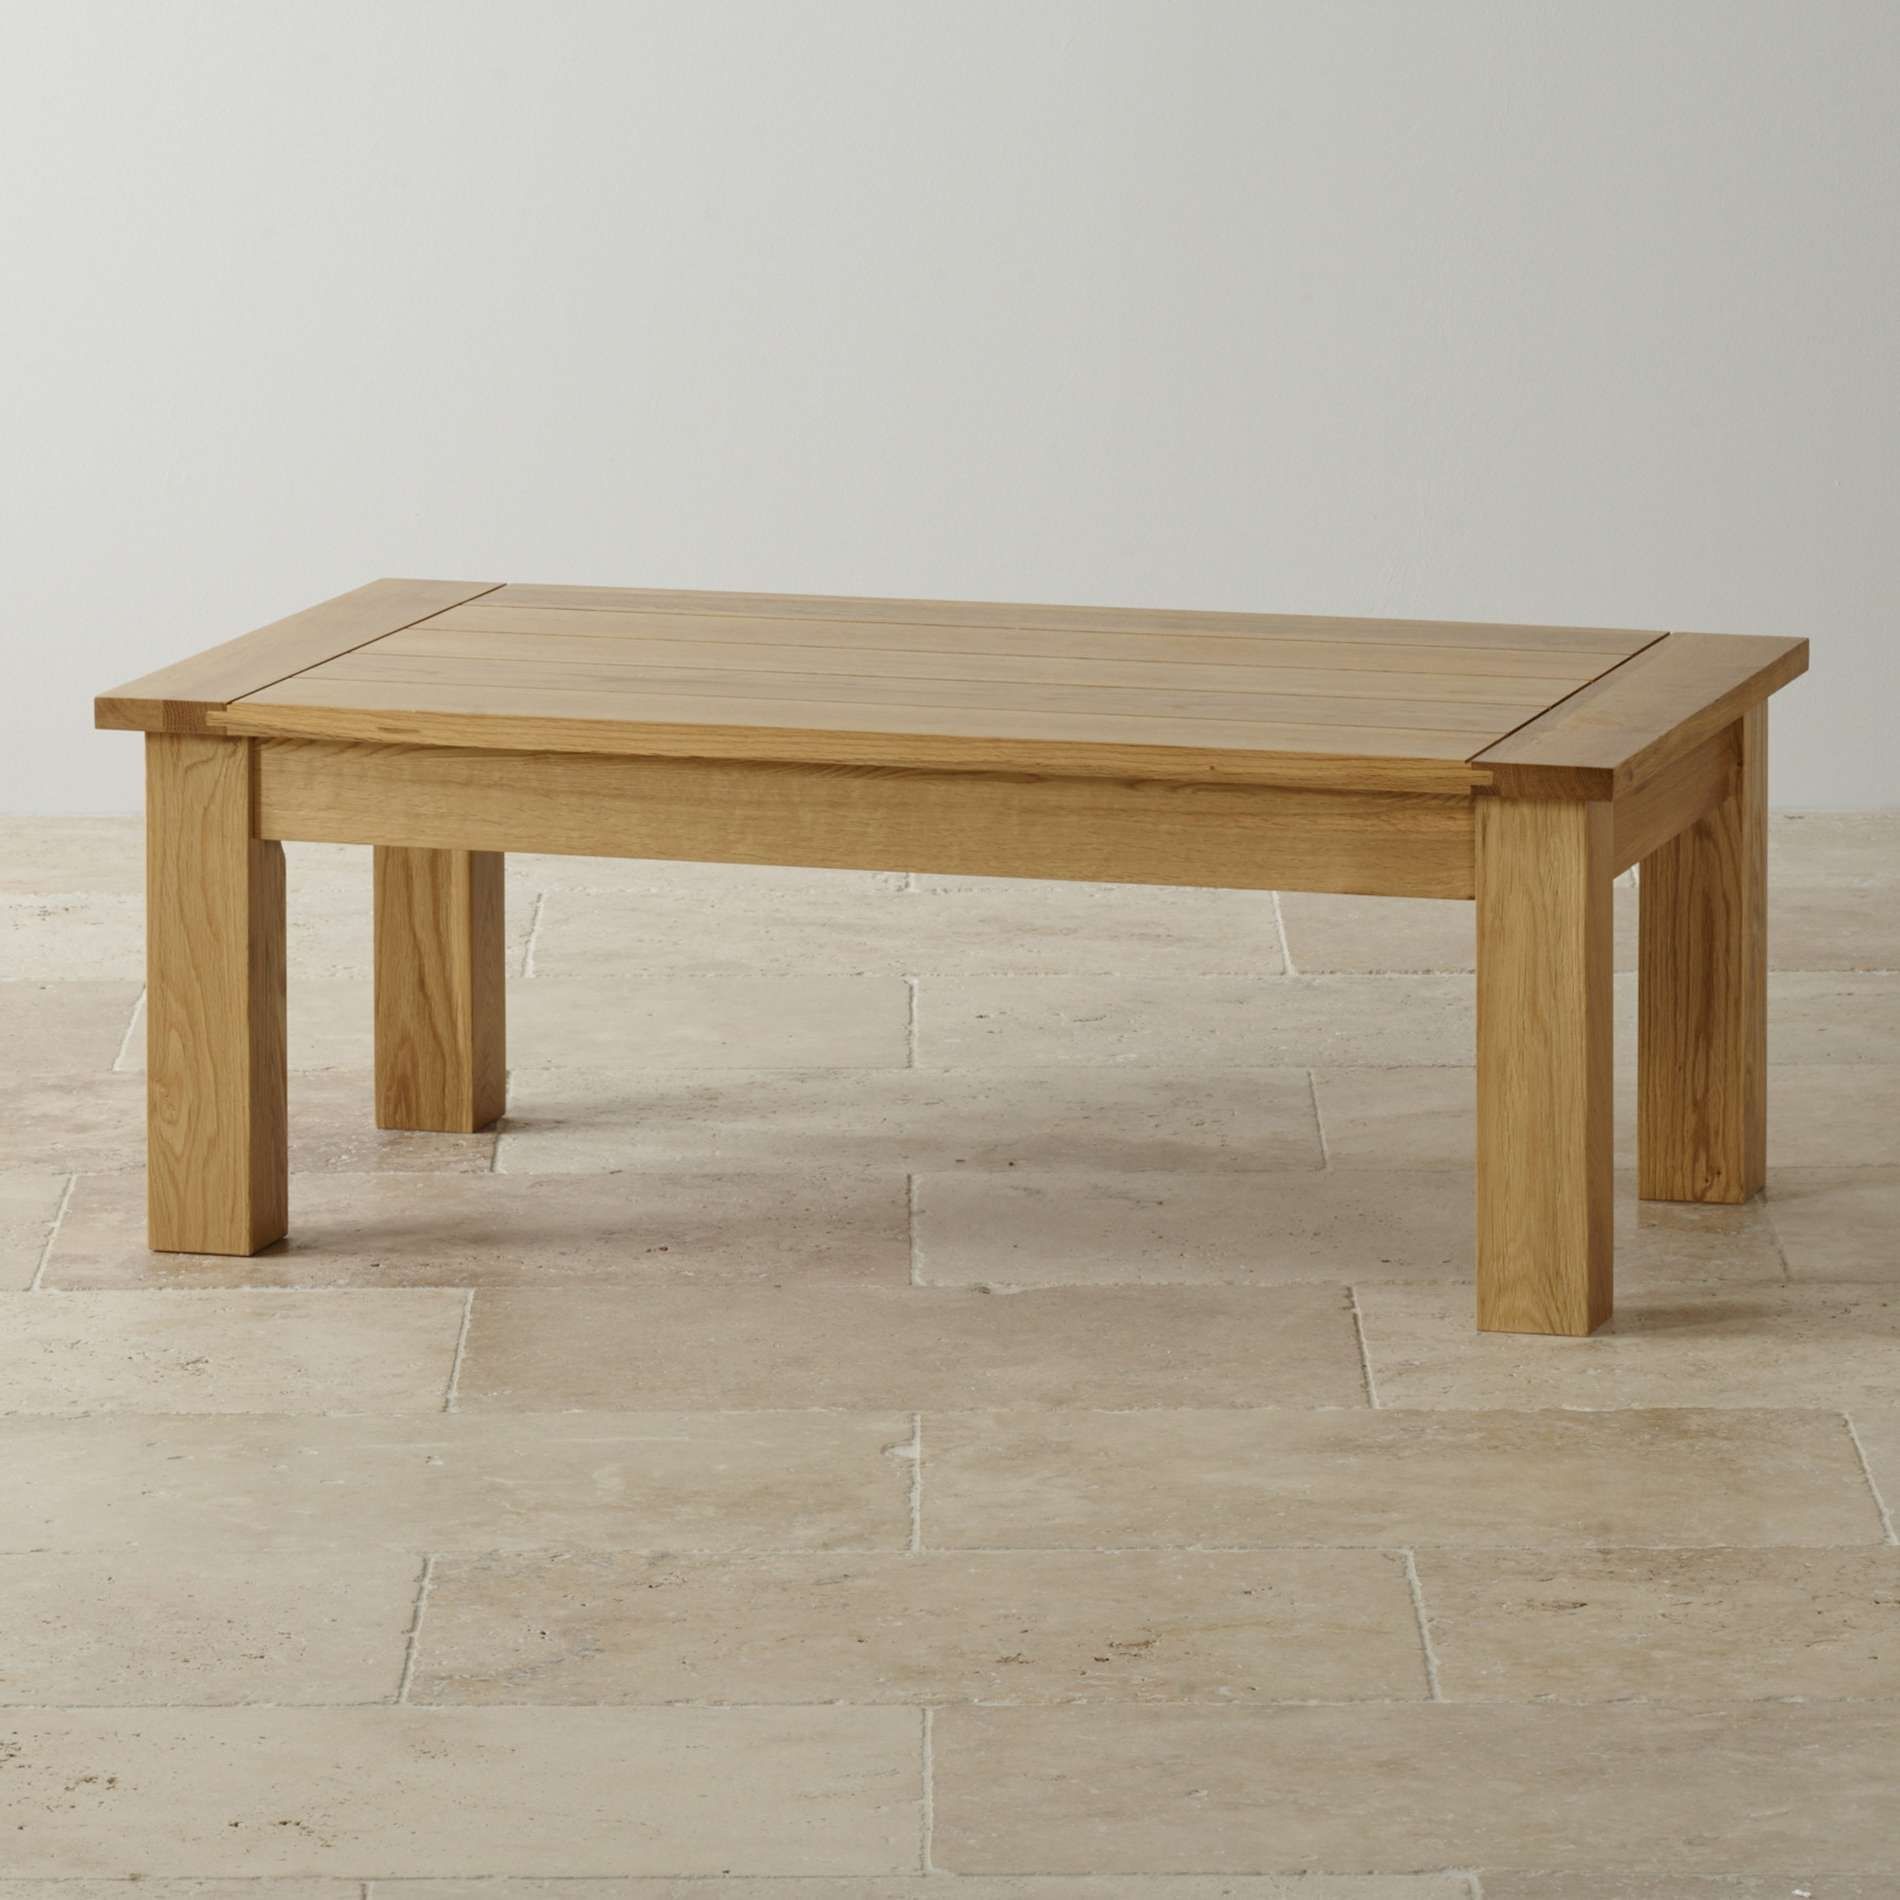 Most Popular Small Oak Coffee Tables Throughout Coffee Table : Amazing Cool Coffee Tables Living Room Furniture (View 1 of 20)